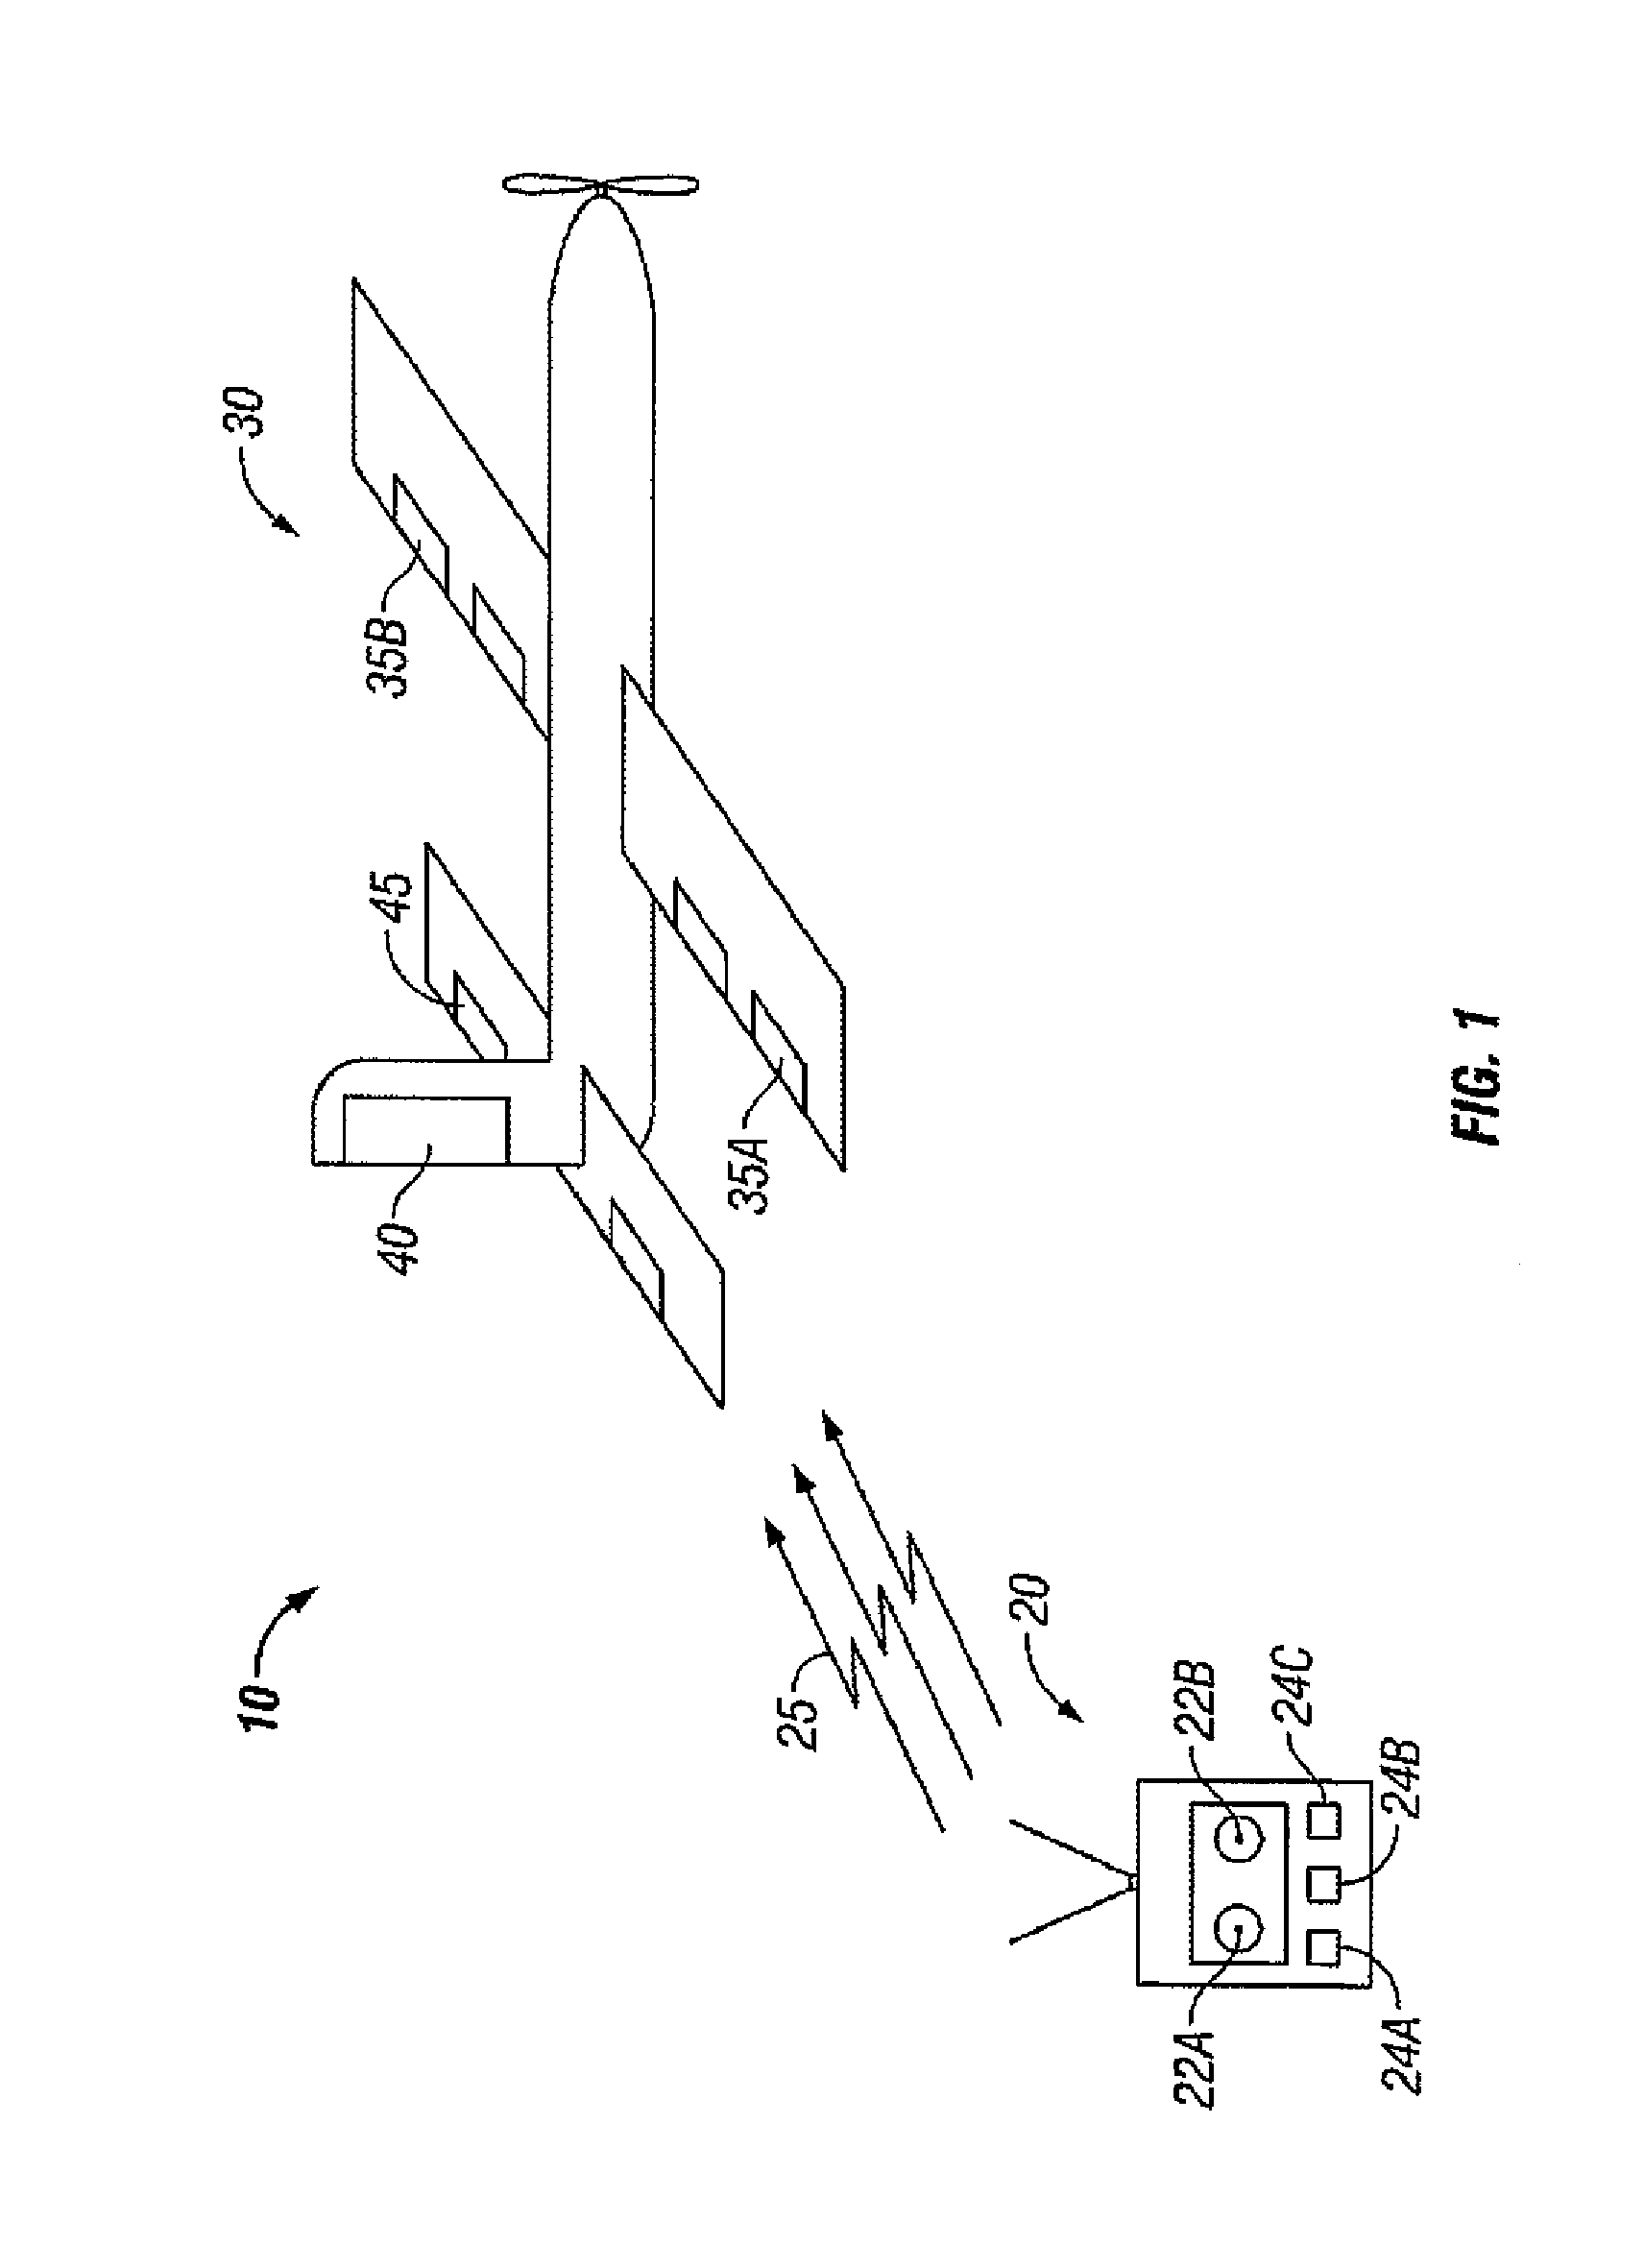 Guidance system for radio-controlled aircraft